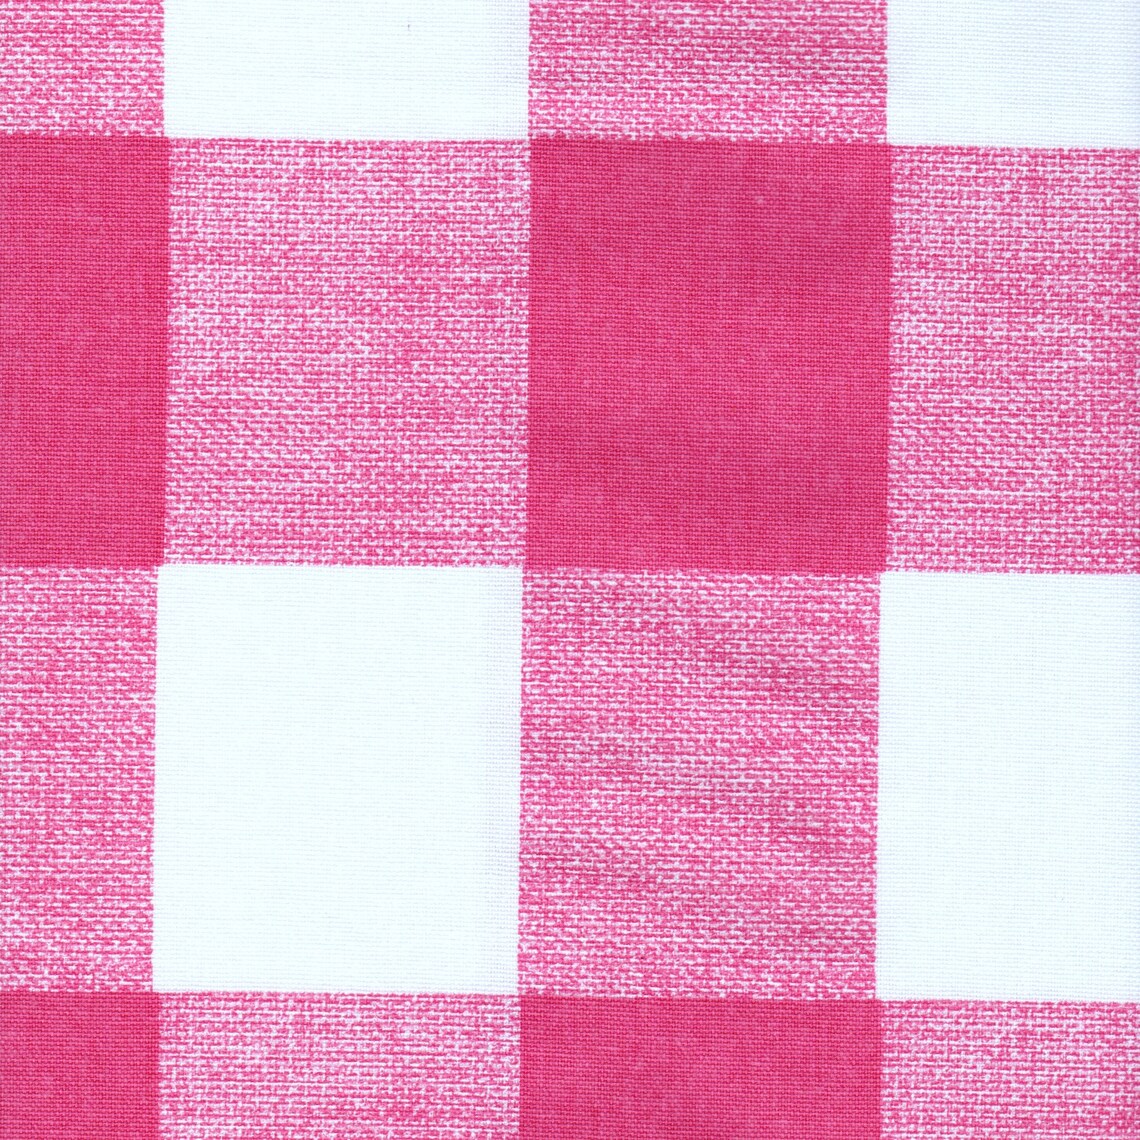 Tailored Bedskirt in Anderson Flamingo Pink Buffalo Check Plaid